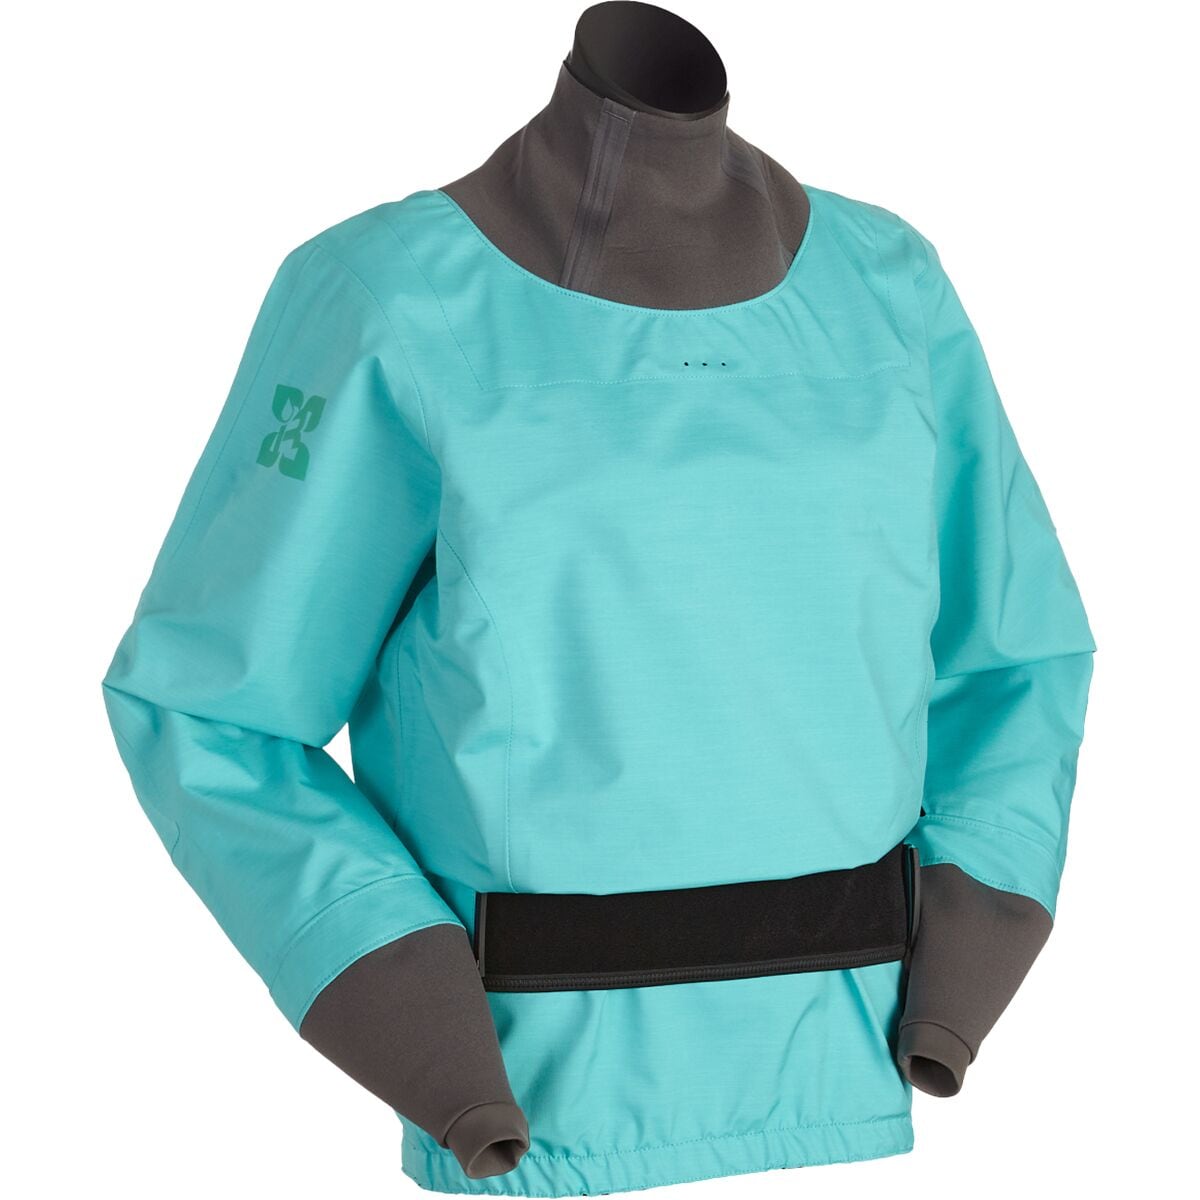 Immersion Research Aphrodite Dry Top - Women's